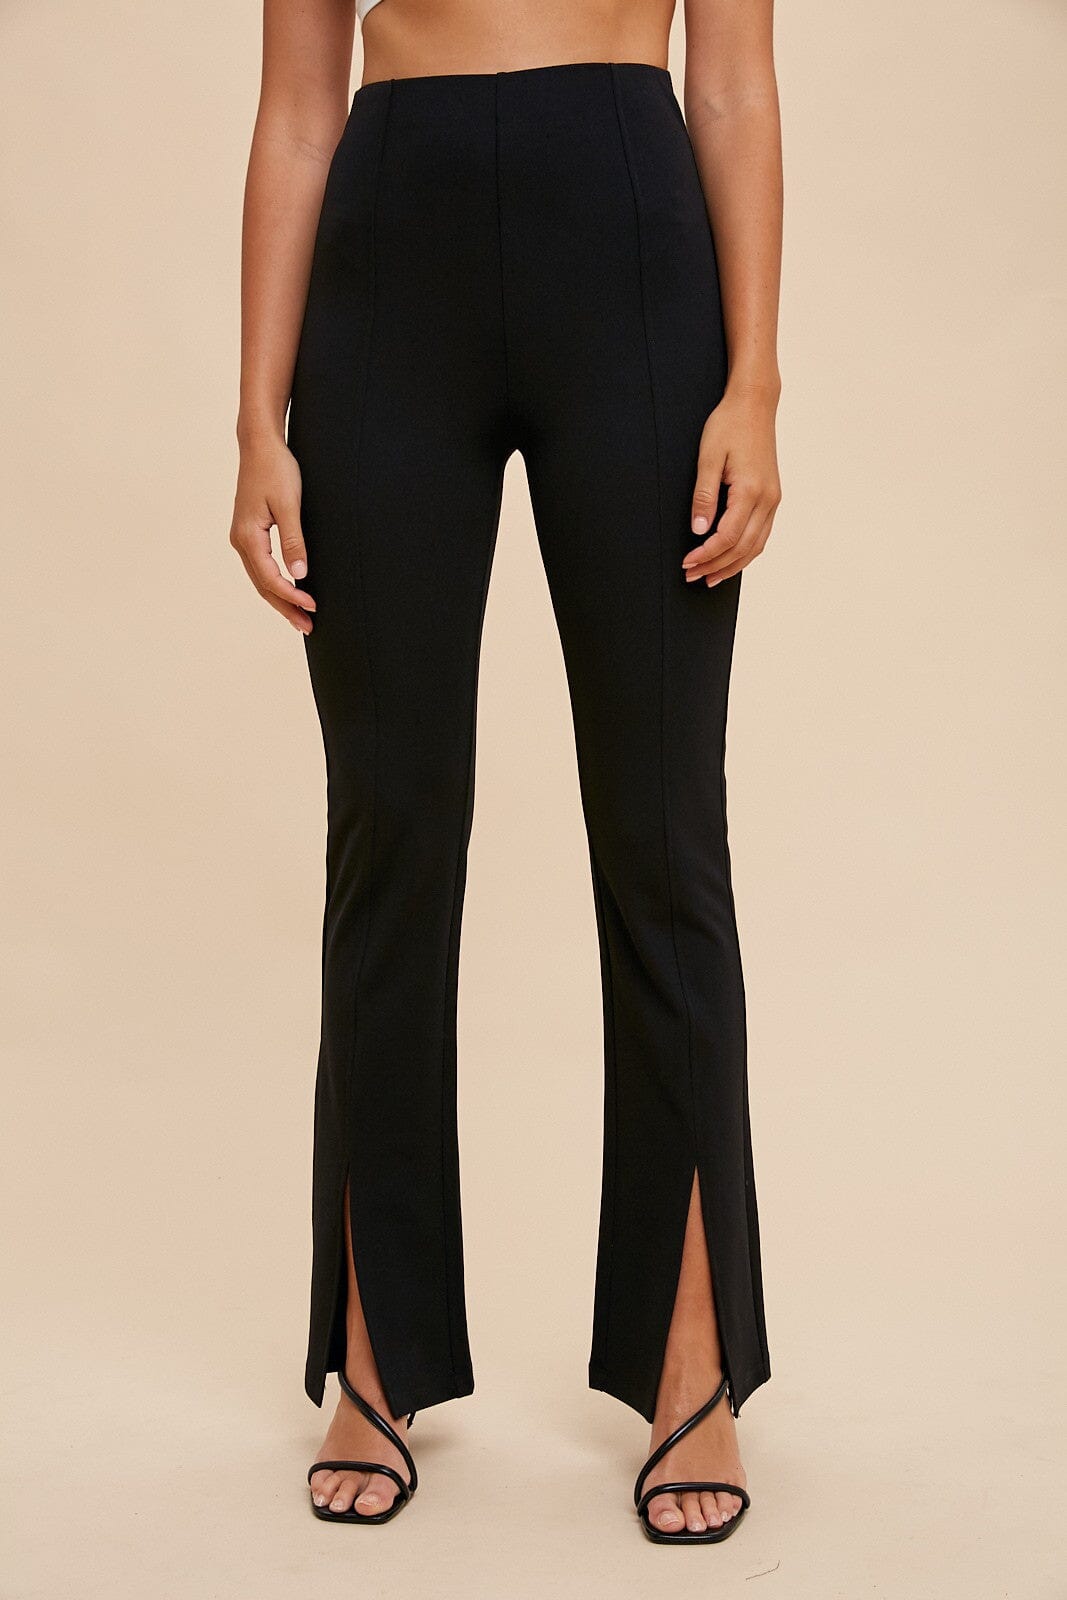 SLIT HEM AND PINTUCK FRONT FLARE STRETCH PANTS annie wear 